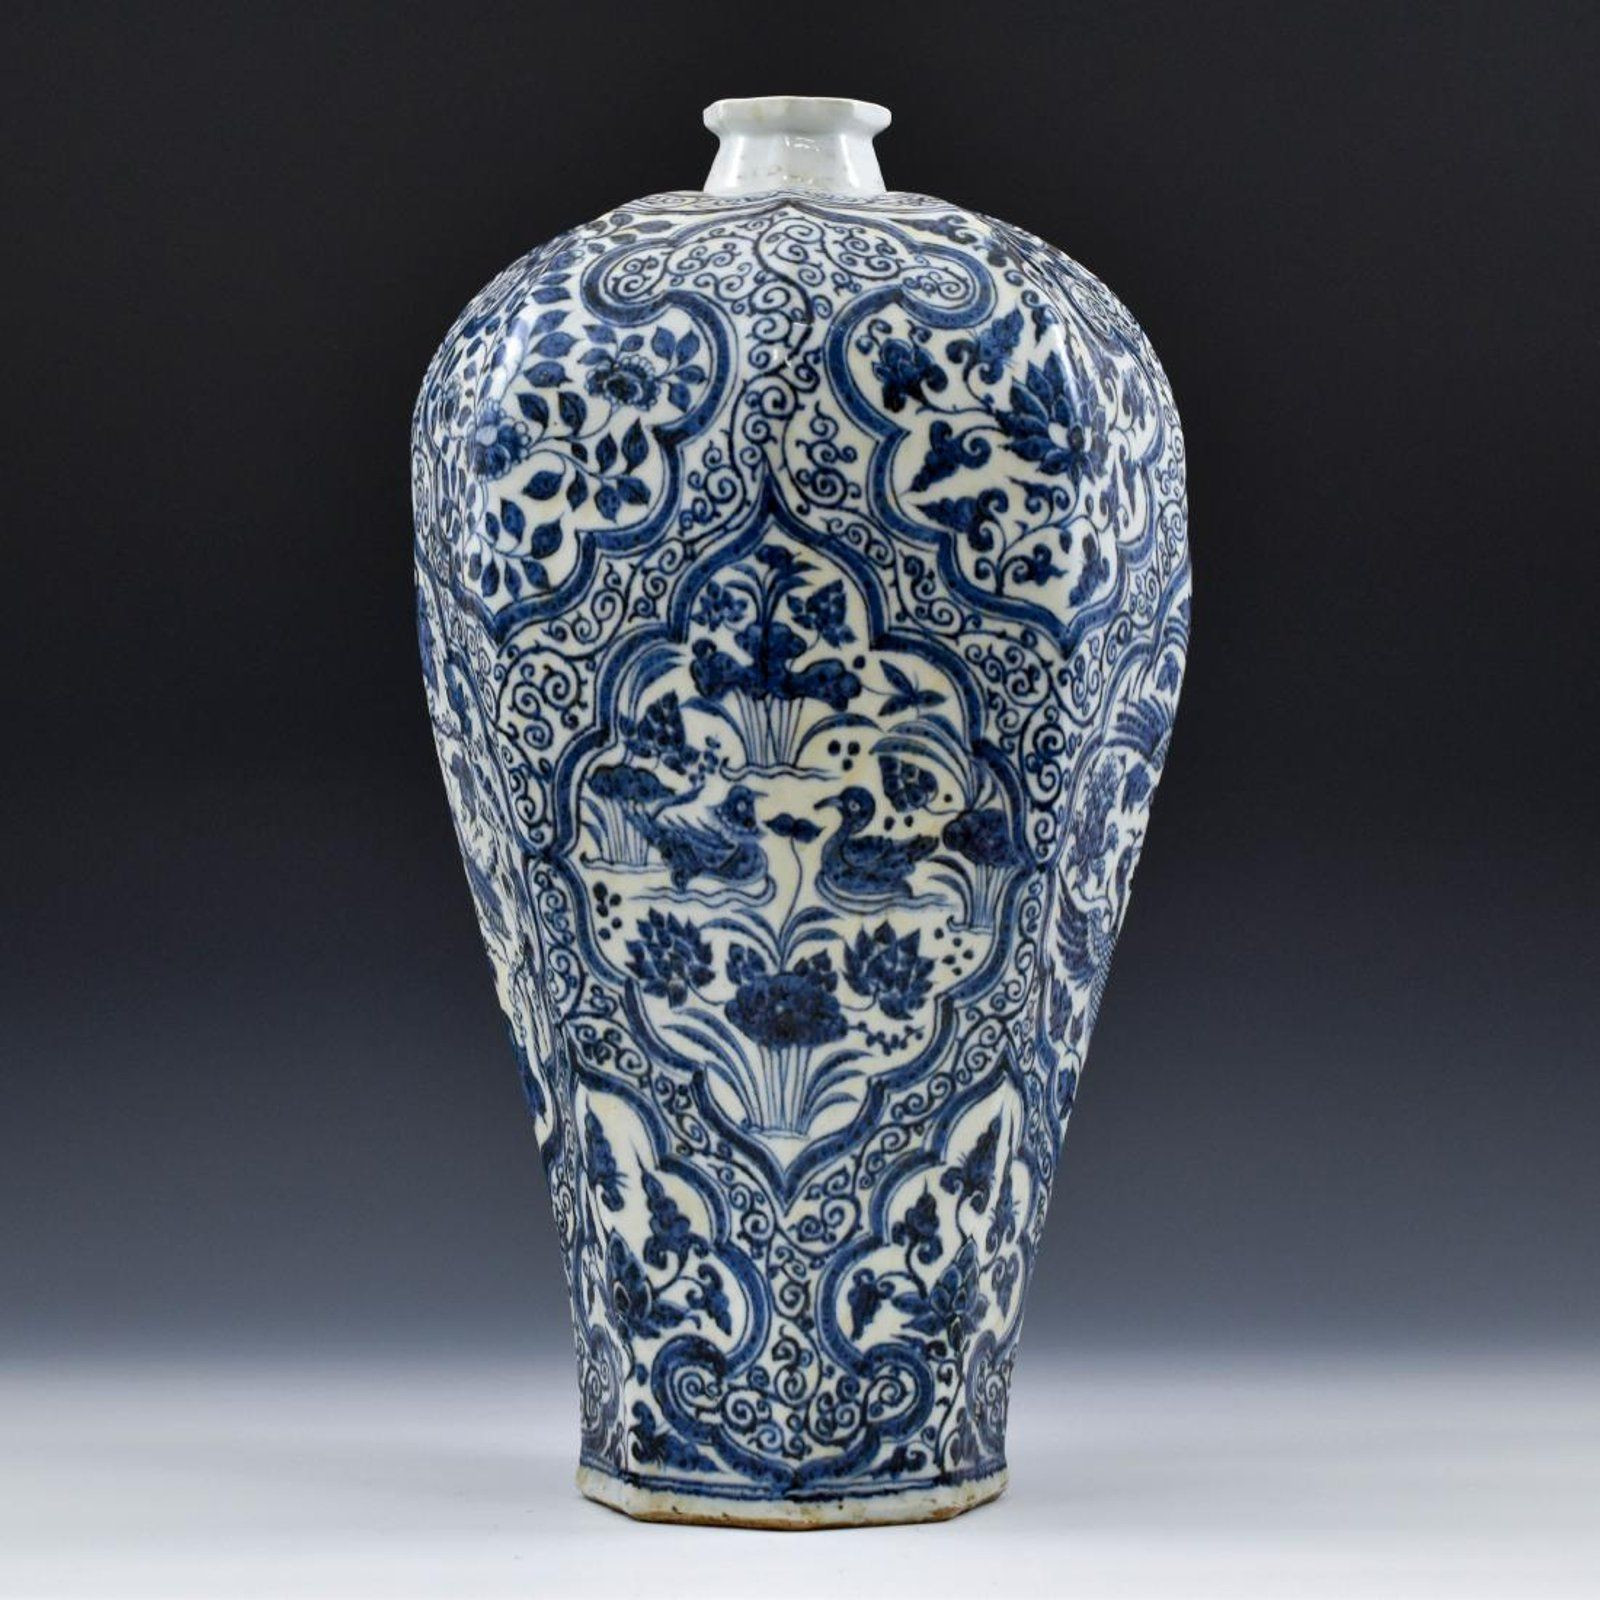 23 Fabulous Chinese Porcelain Vase 2022 free download chinese porcelain vase of ming dynasty blue and white octagonal meiping vase on blue and inside ming dynasty blue and white octagonal meiping vase